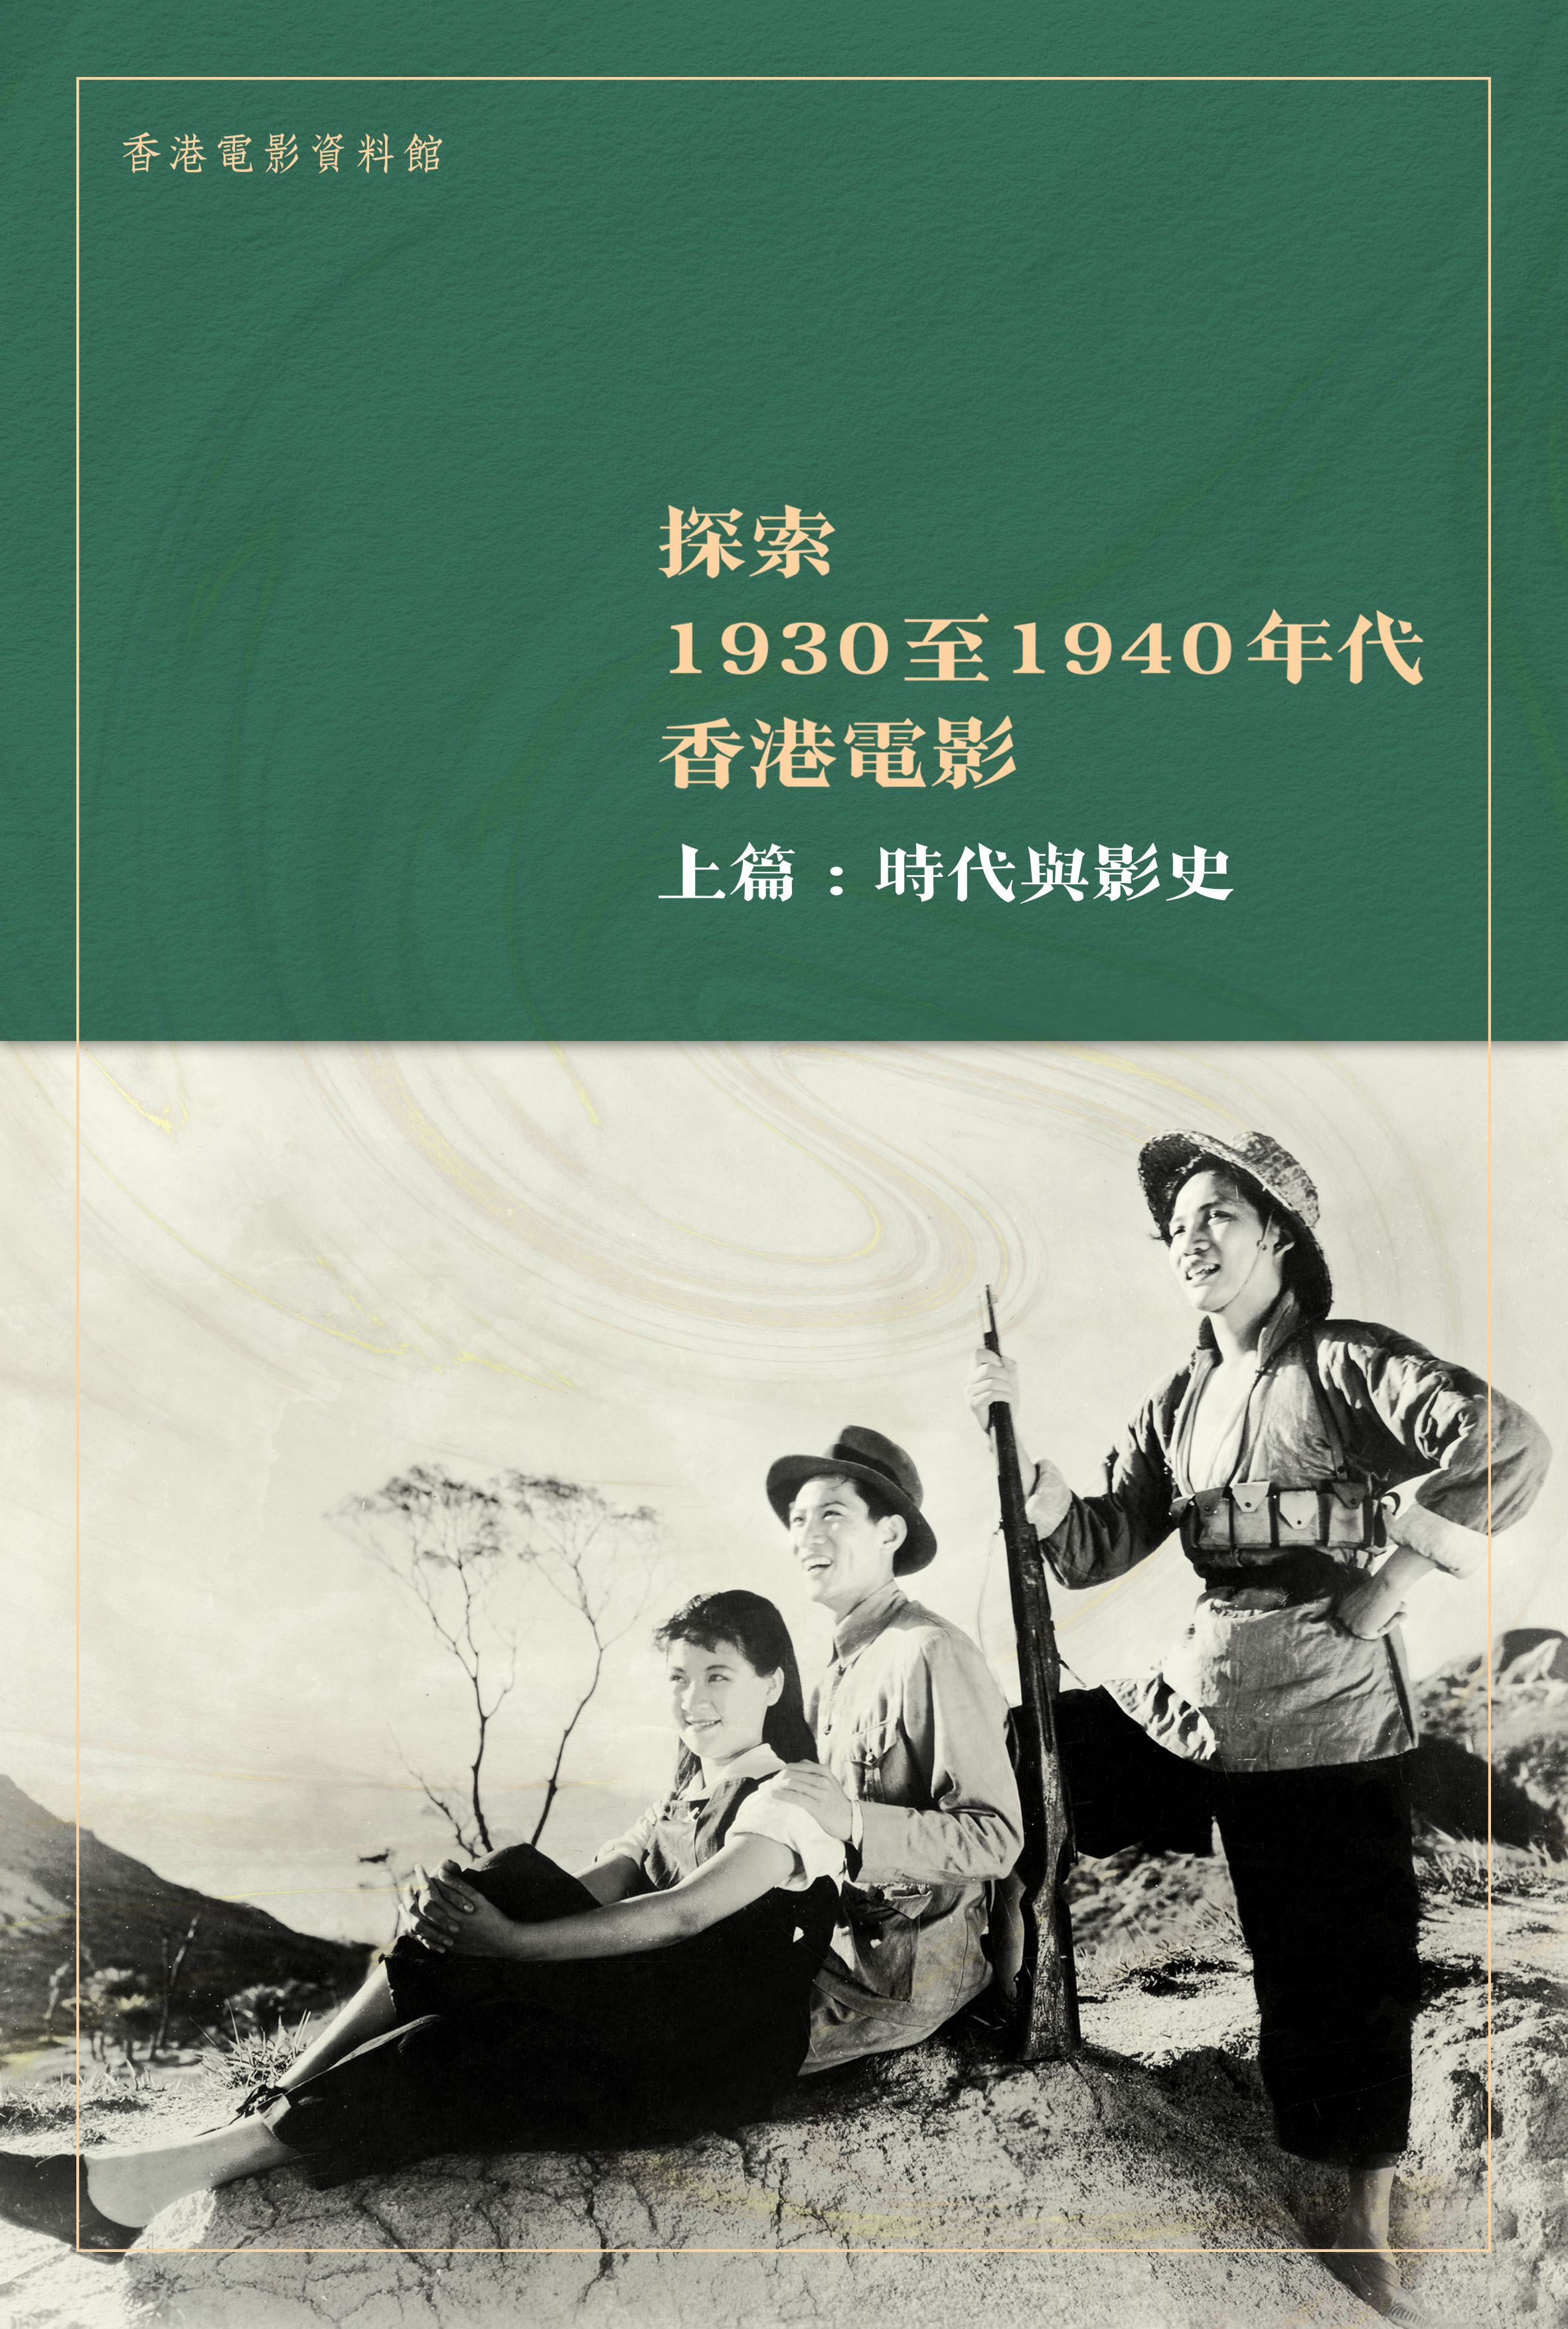 Exploring Hong Kong Films of the 1930s and 1940s　Part 1: Era and Film History (Chinese edition) Book Cover